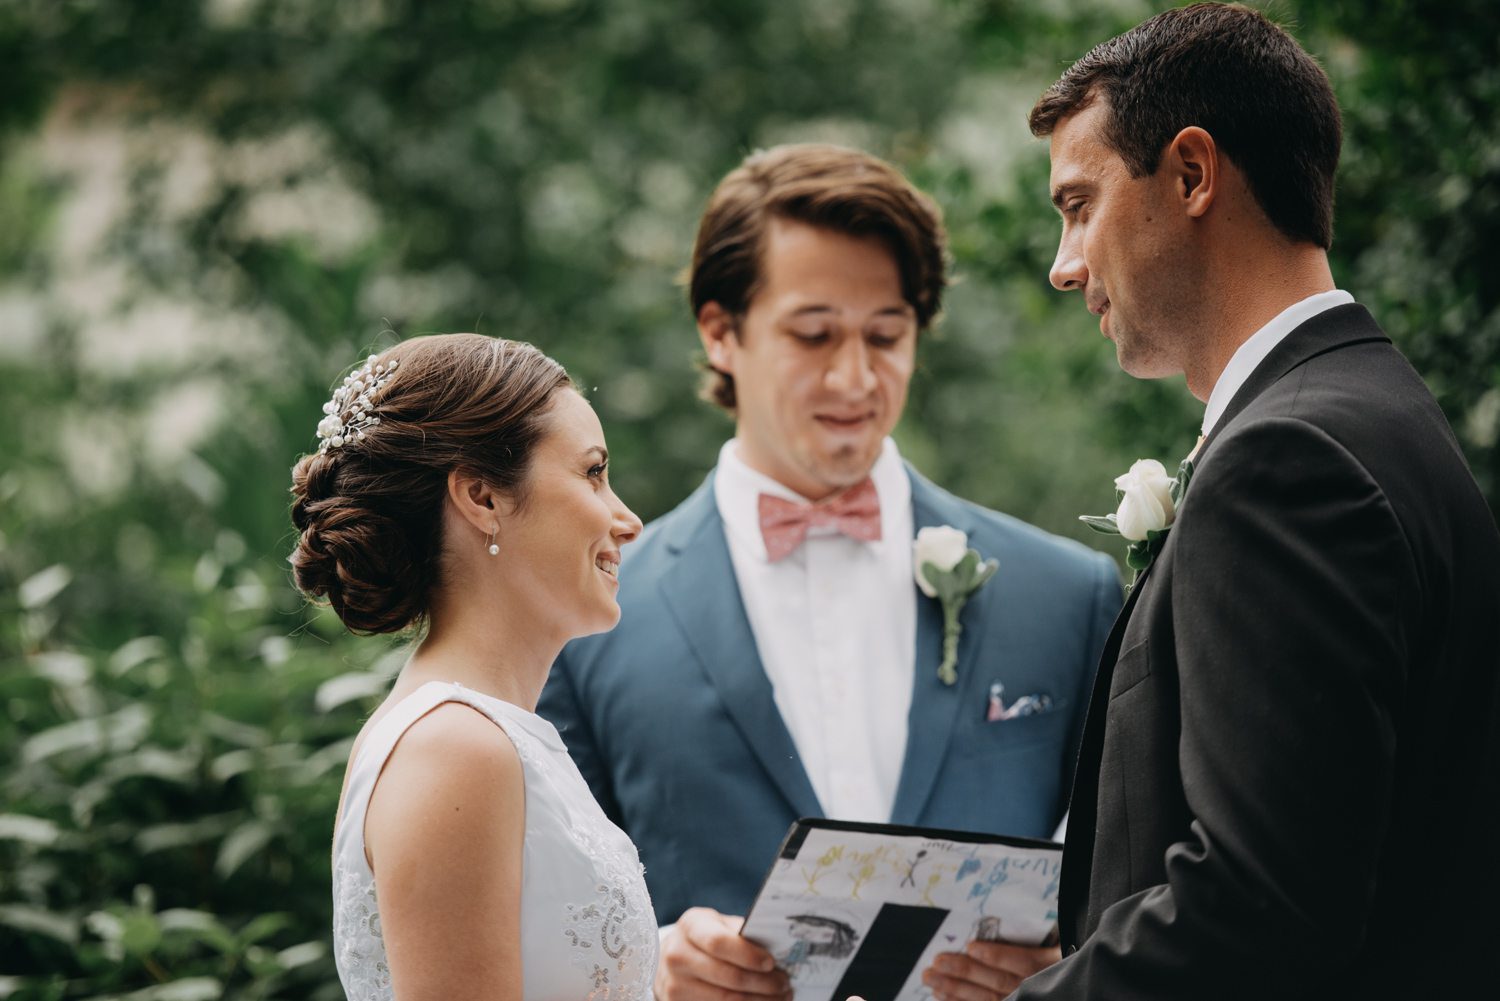 A bride and groom exchange vows during a Dupont Circle wedding ceremony.